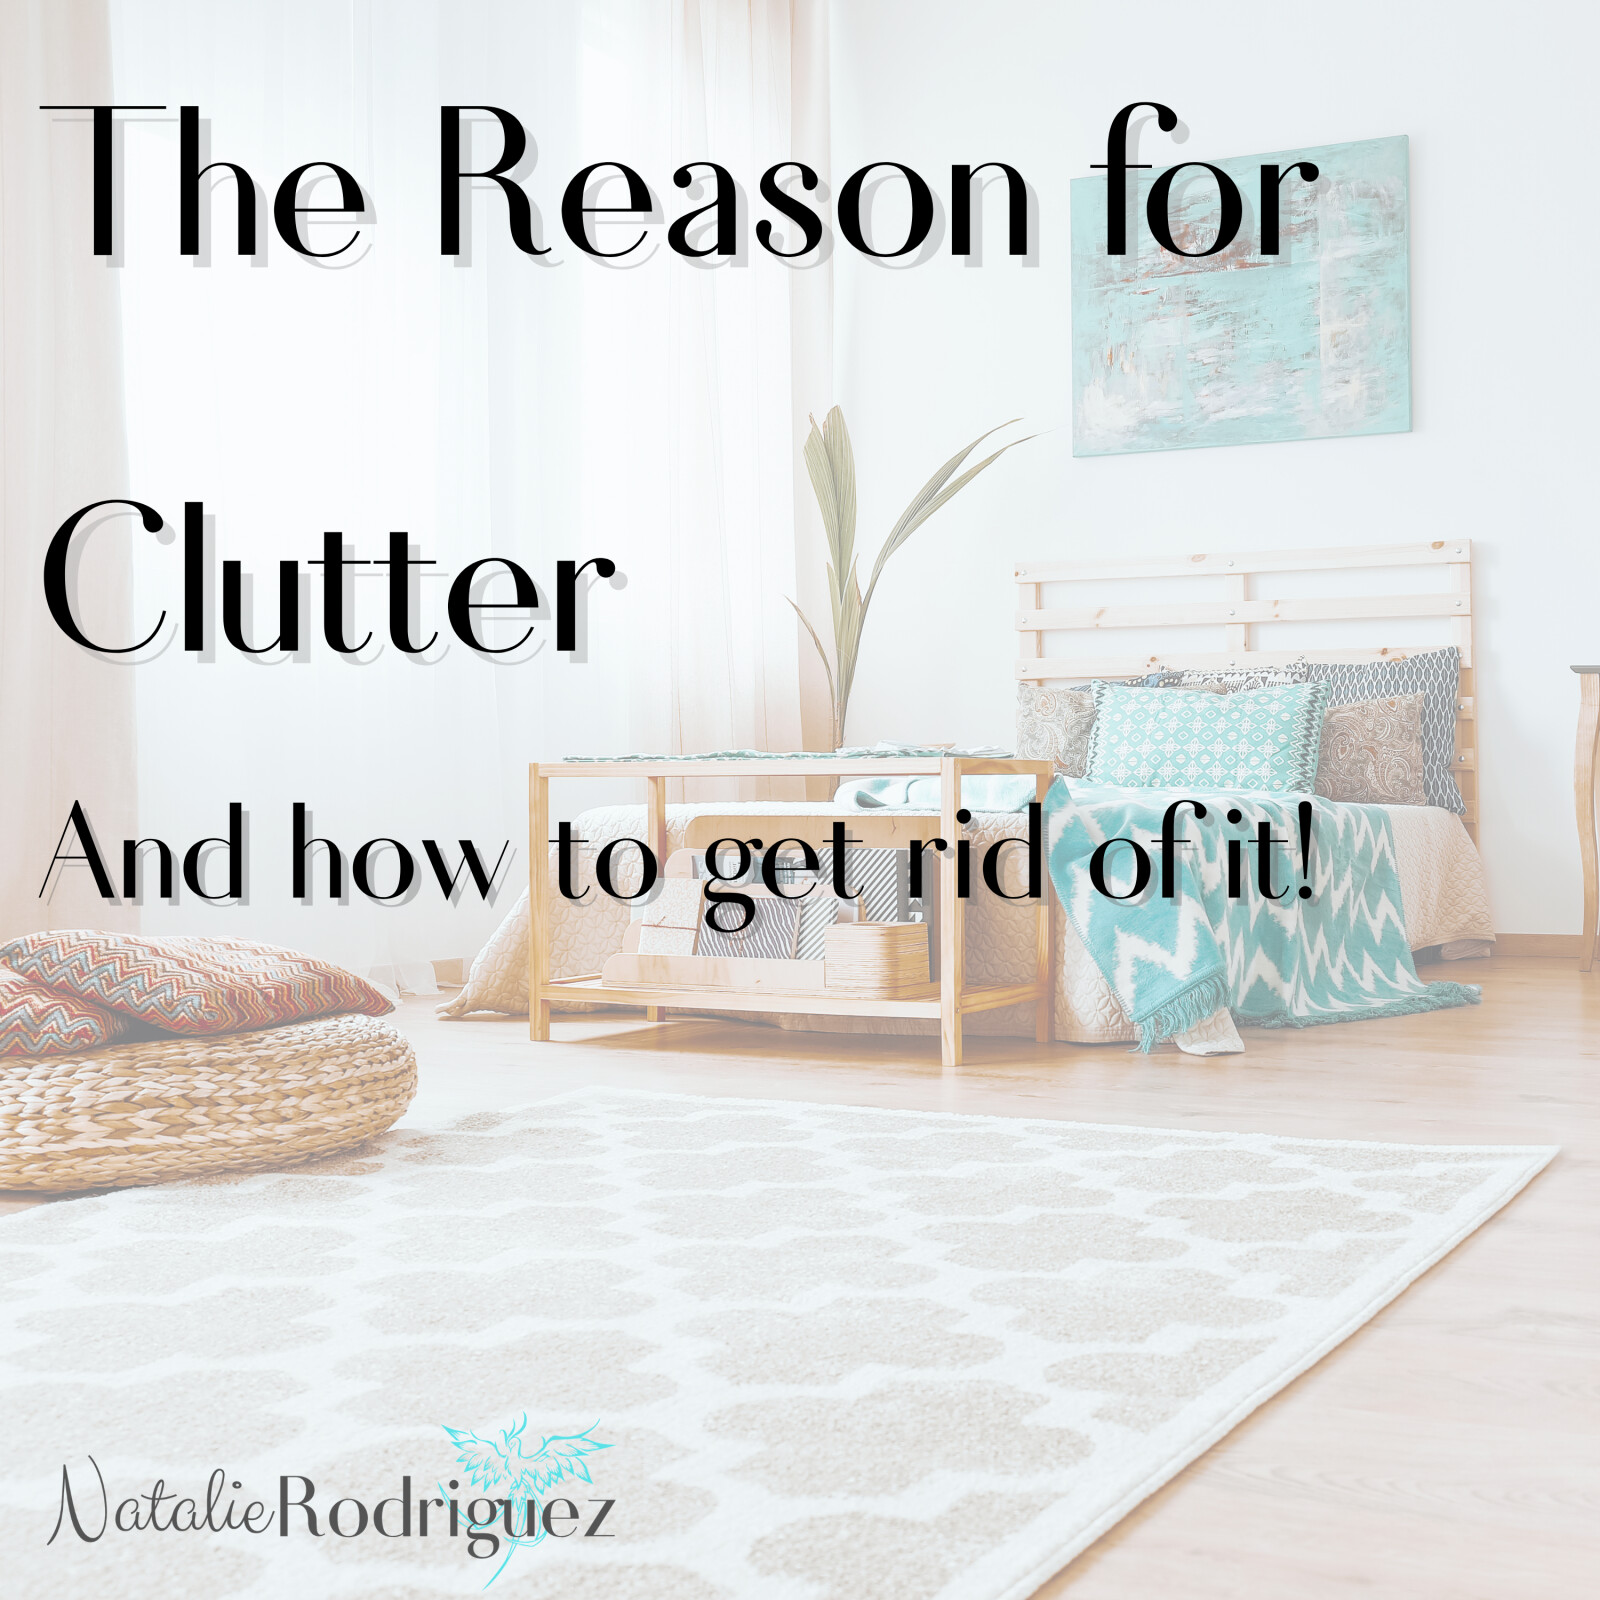 The Real Reason for Clutter